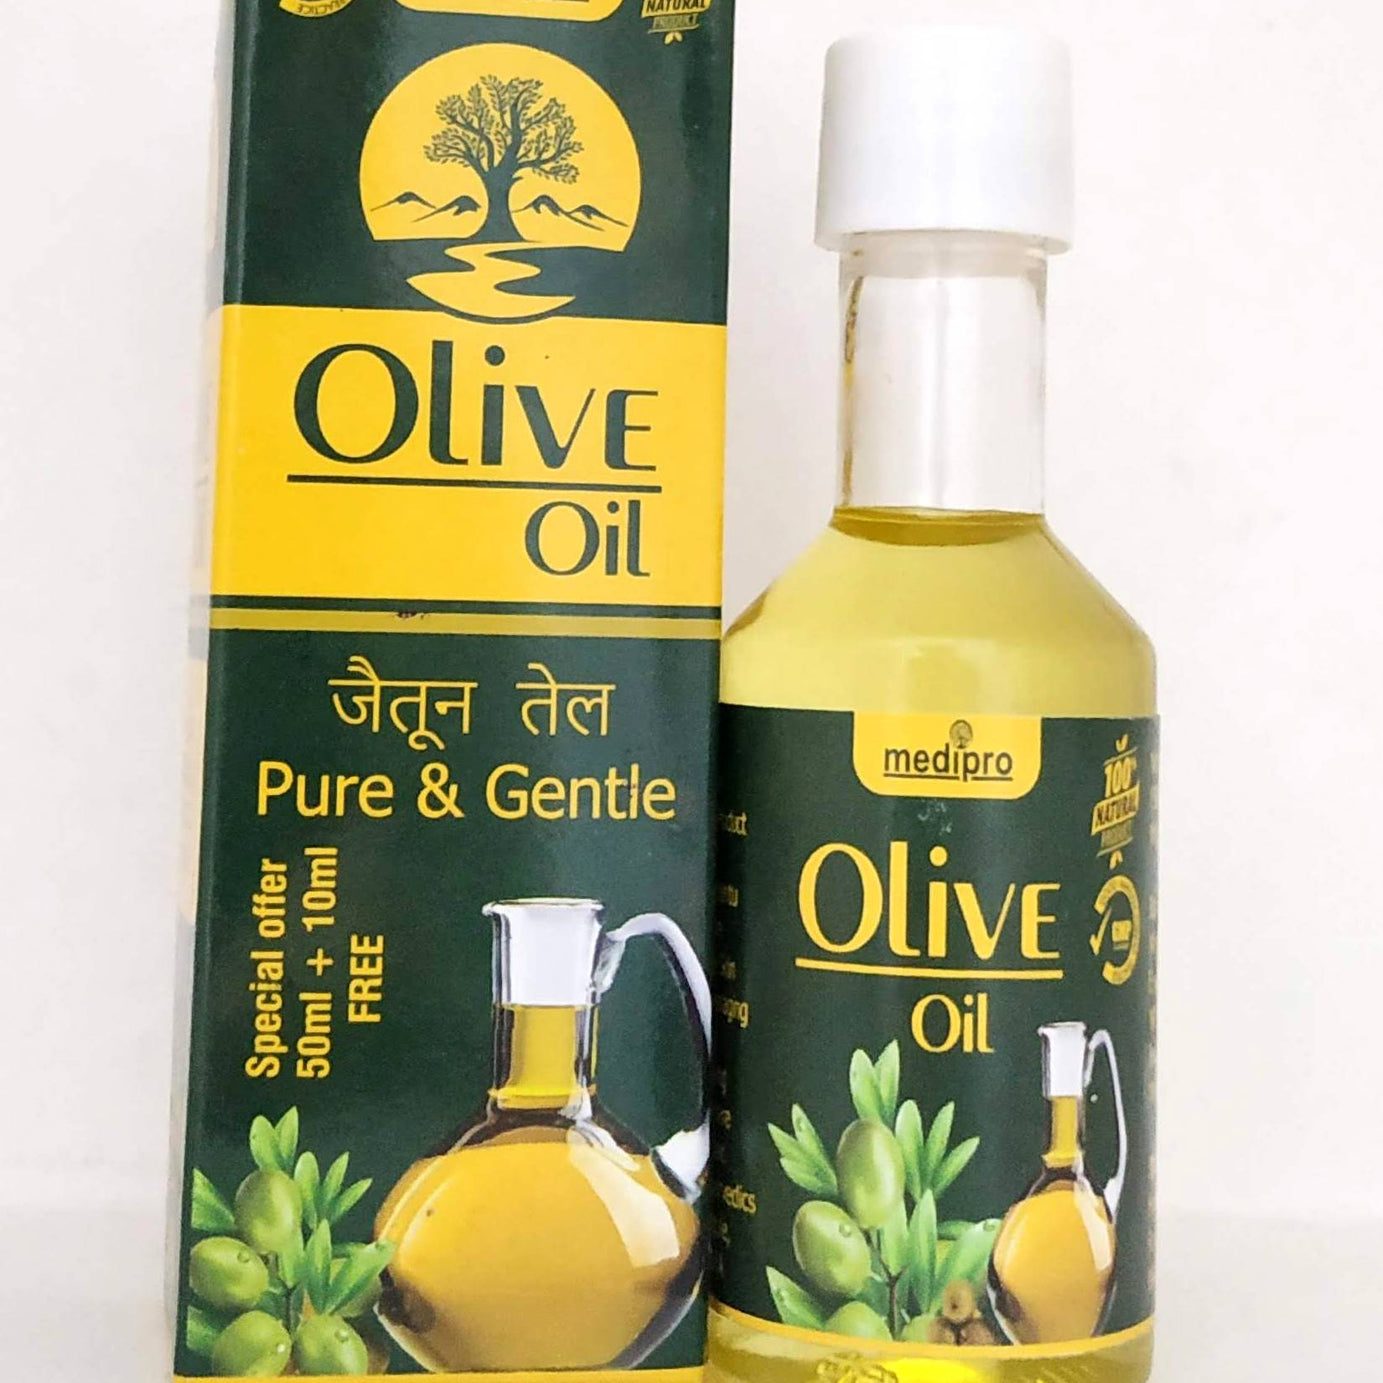 Shop Olive oil 60ml at price 72.00 from Medipro Online - Ayush Care